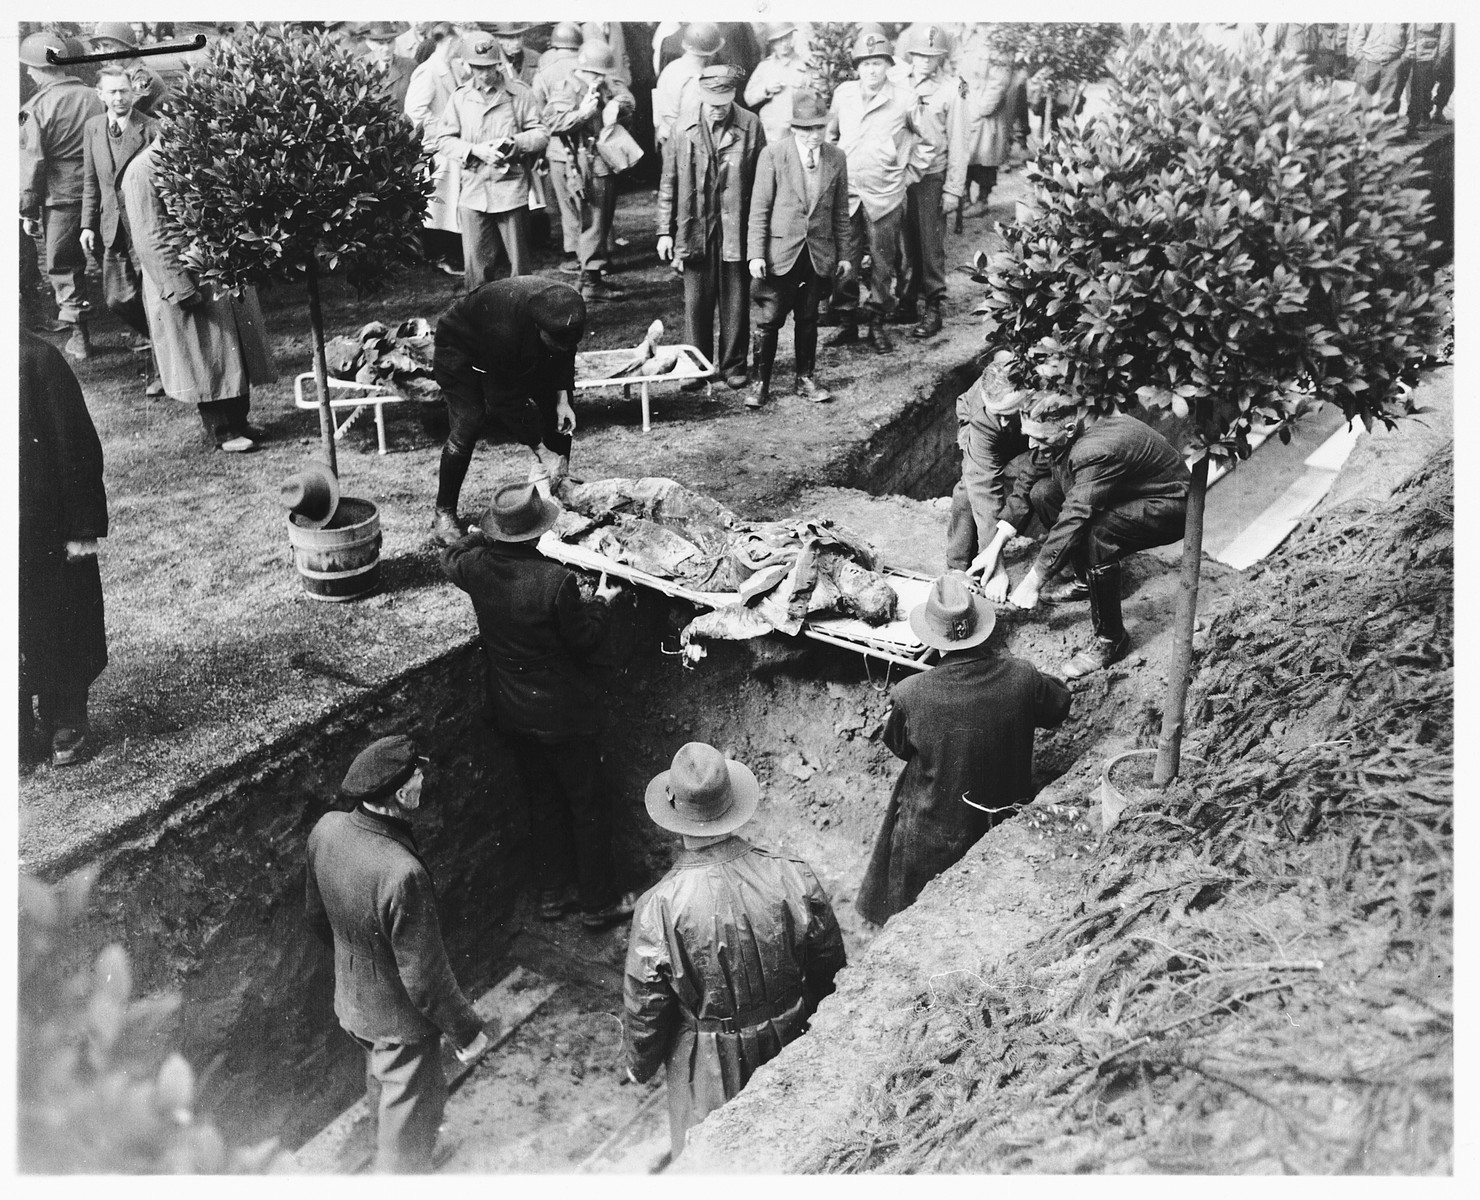 Under the direction of American soldiers, German civilians rebury the bodies of 71 political prisoners, exhumed from a mass grave near Solingen-Ohligs, in front of the city hall.  

The victims, most of whom were taken from Luettringhausen prison, were shot and buried by the Gestapo following orders to eliminate all Reich enemies just before the end of the war.